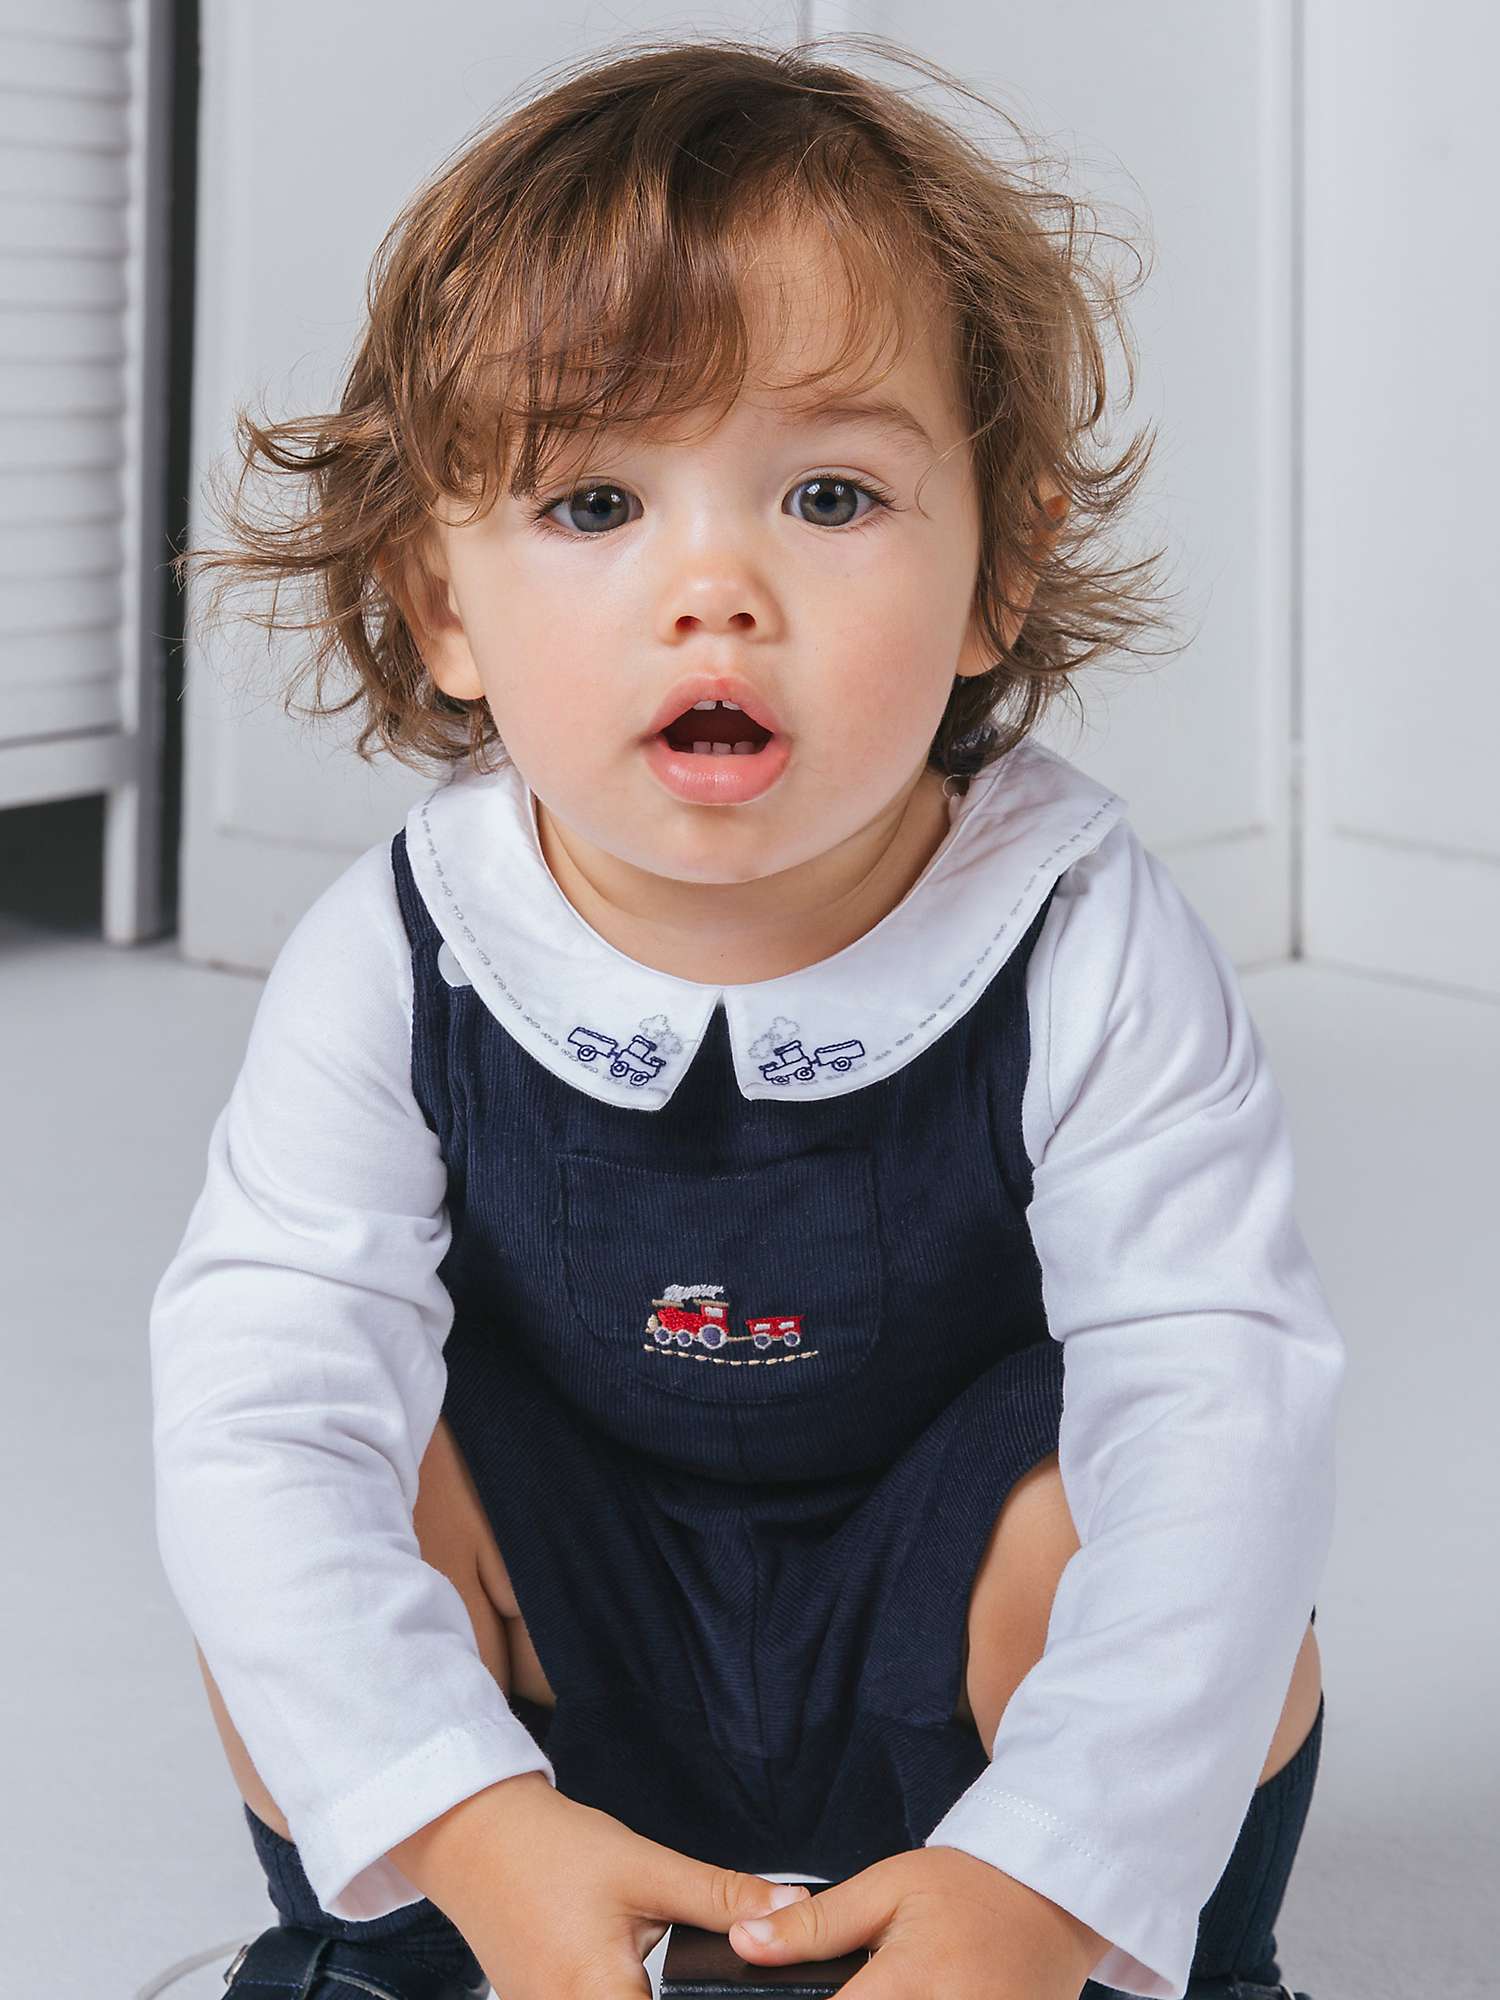 Buy Trotters Thomas Brown Baby Monty Train Jersey Bodysuit, White Online at johnlewis.com